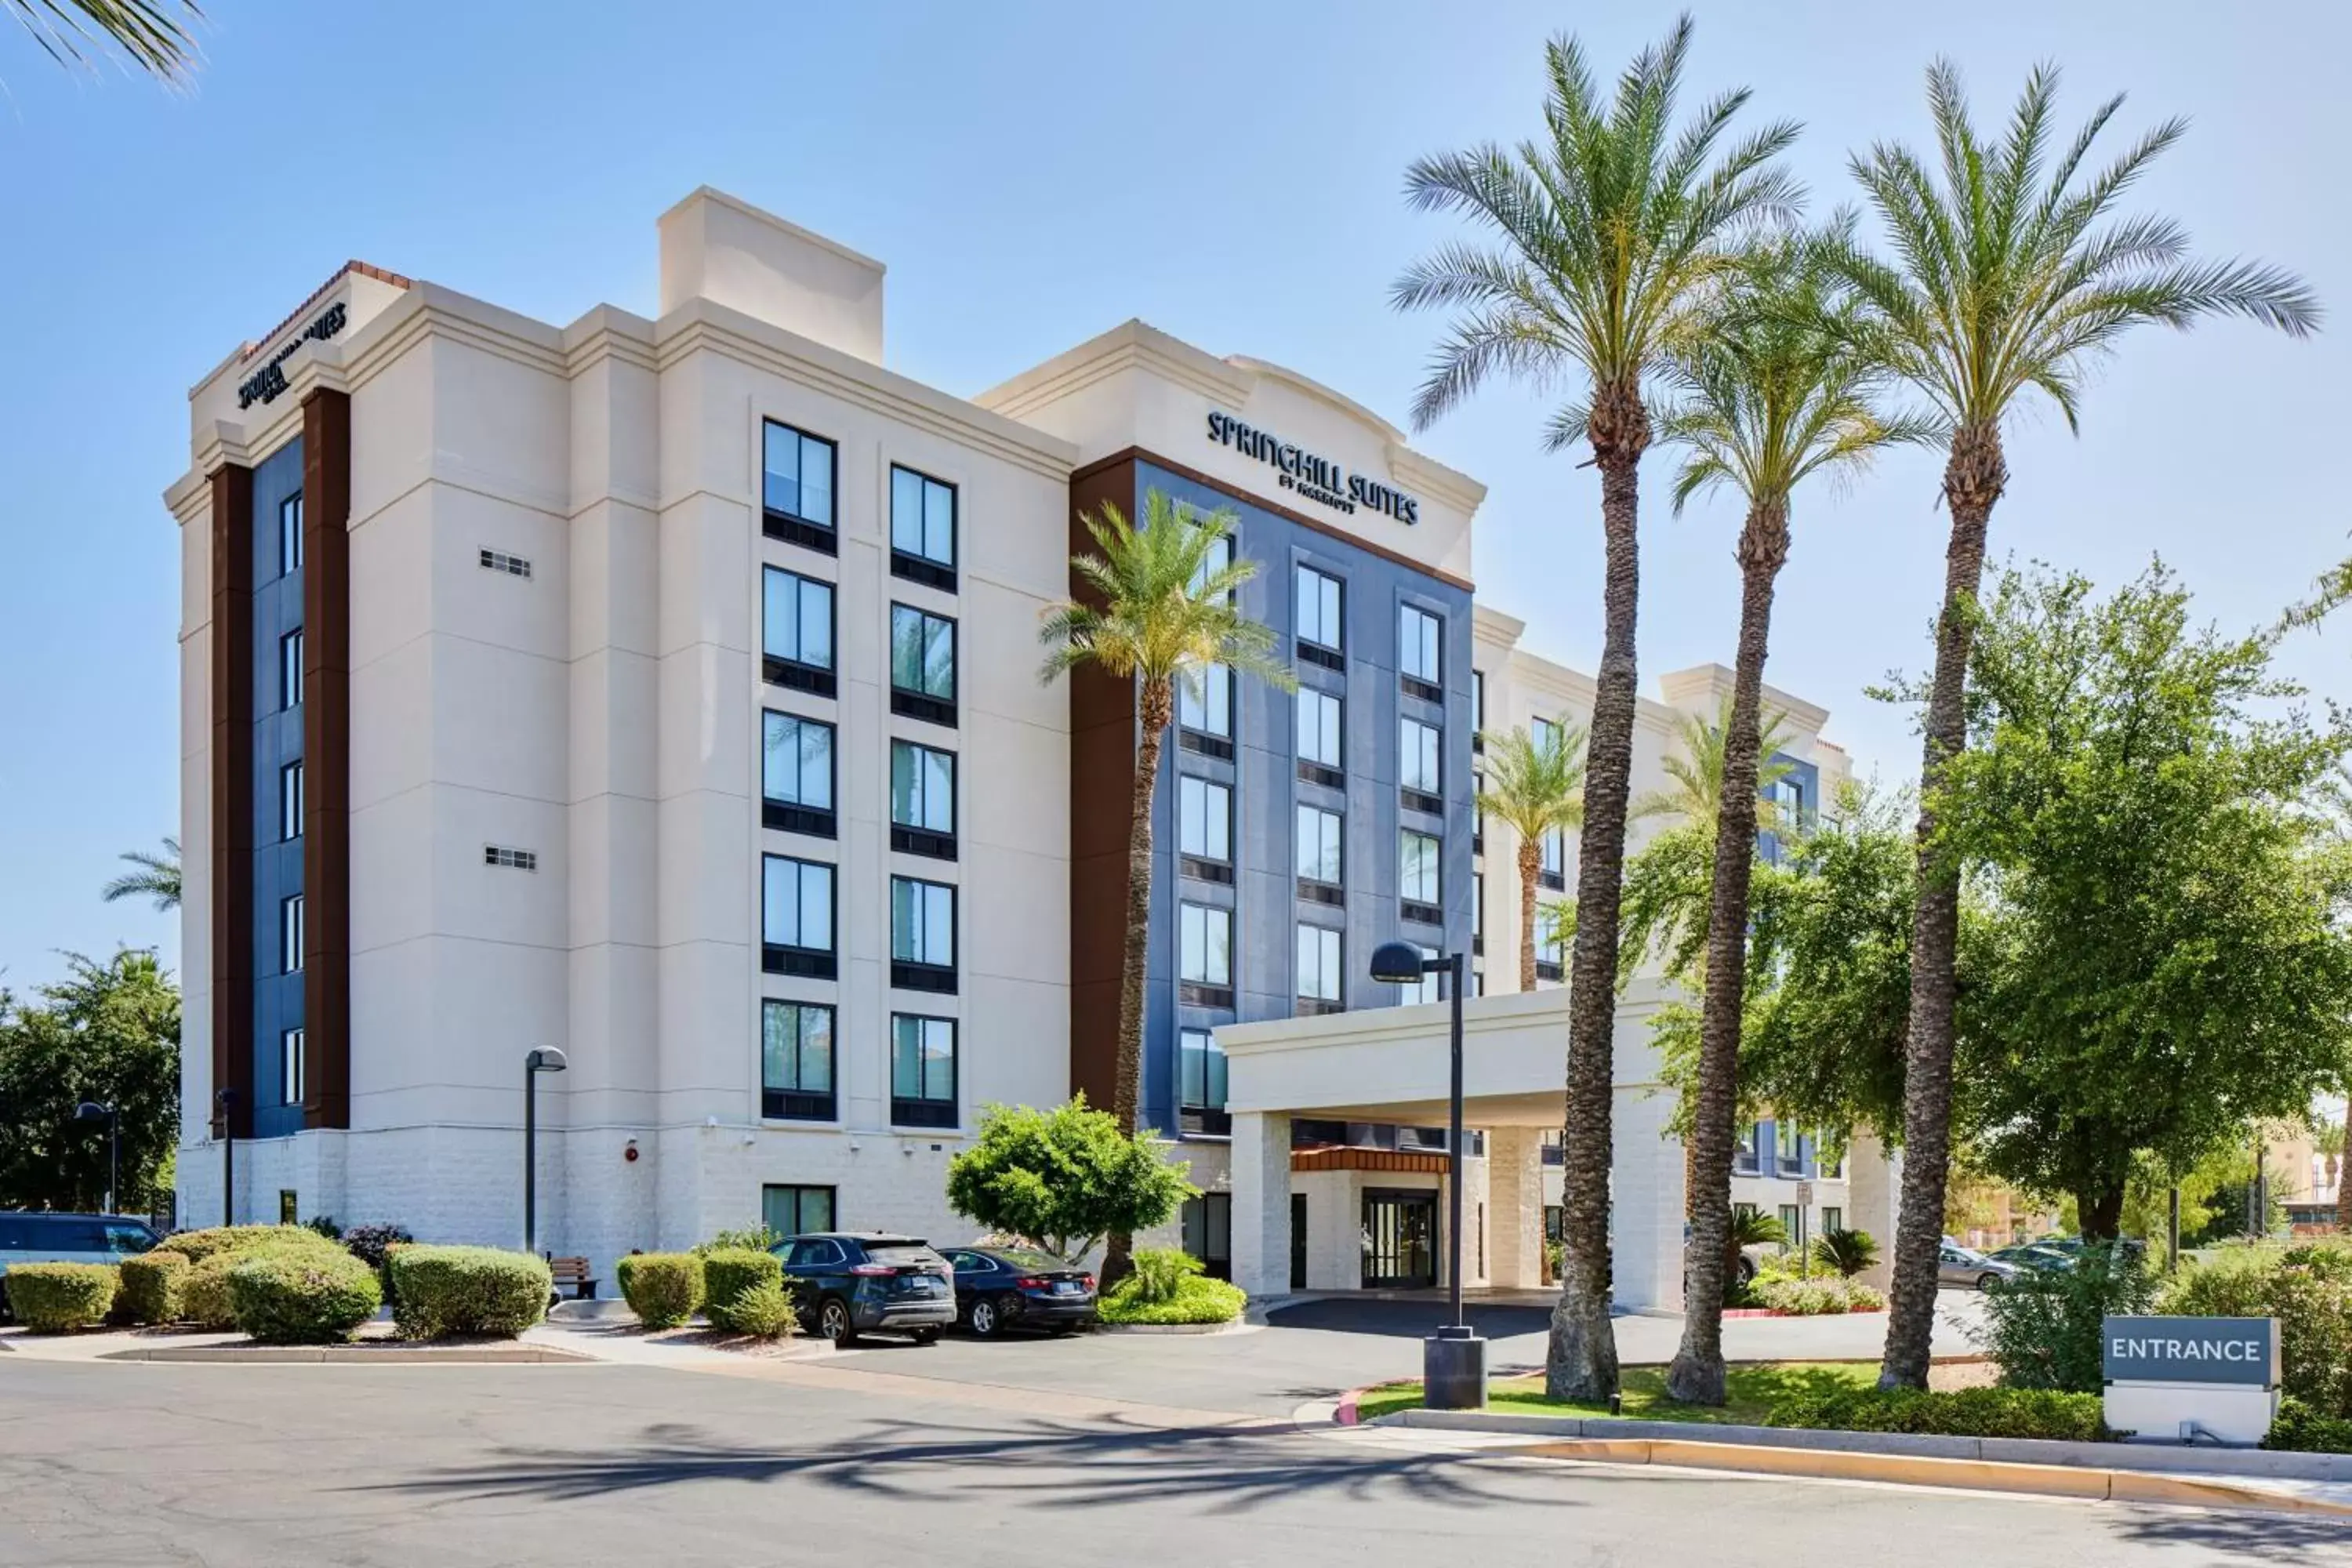 Property Building in SpringHill Suites Phoenix Downtown